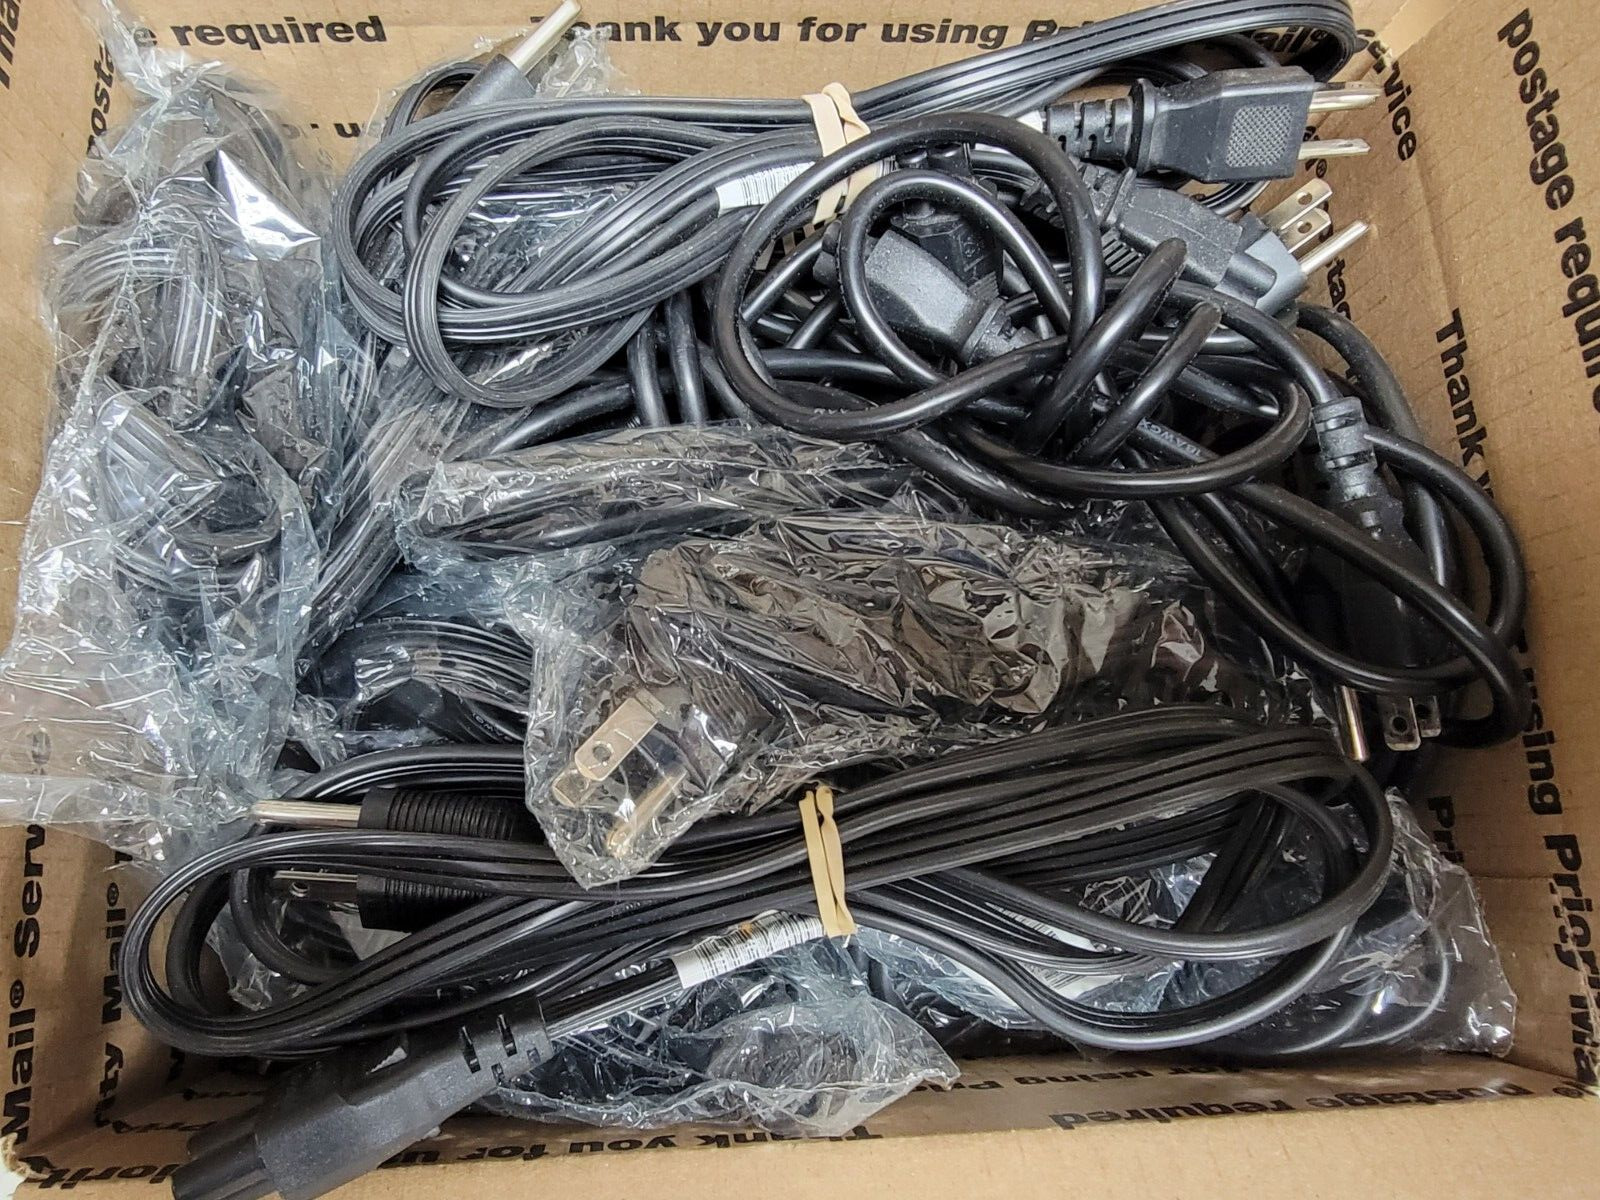 Lot of 30 Three (3) Prong Mickey Mouse Cloverleaf Power Cords - GRADE A